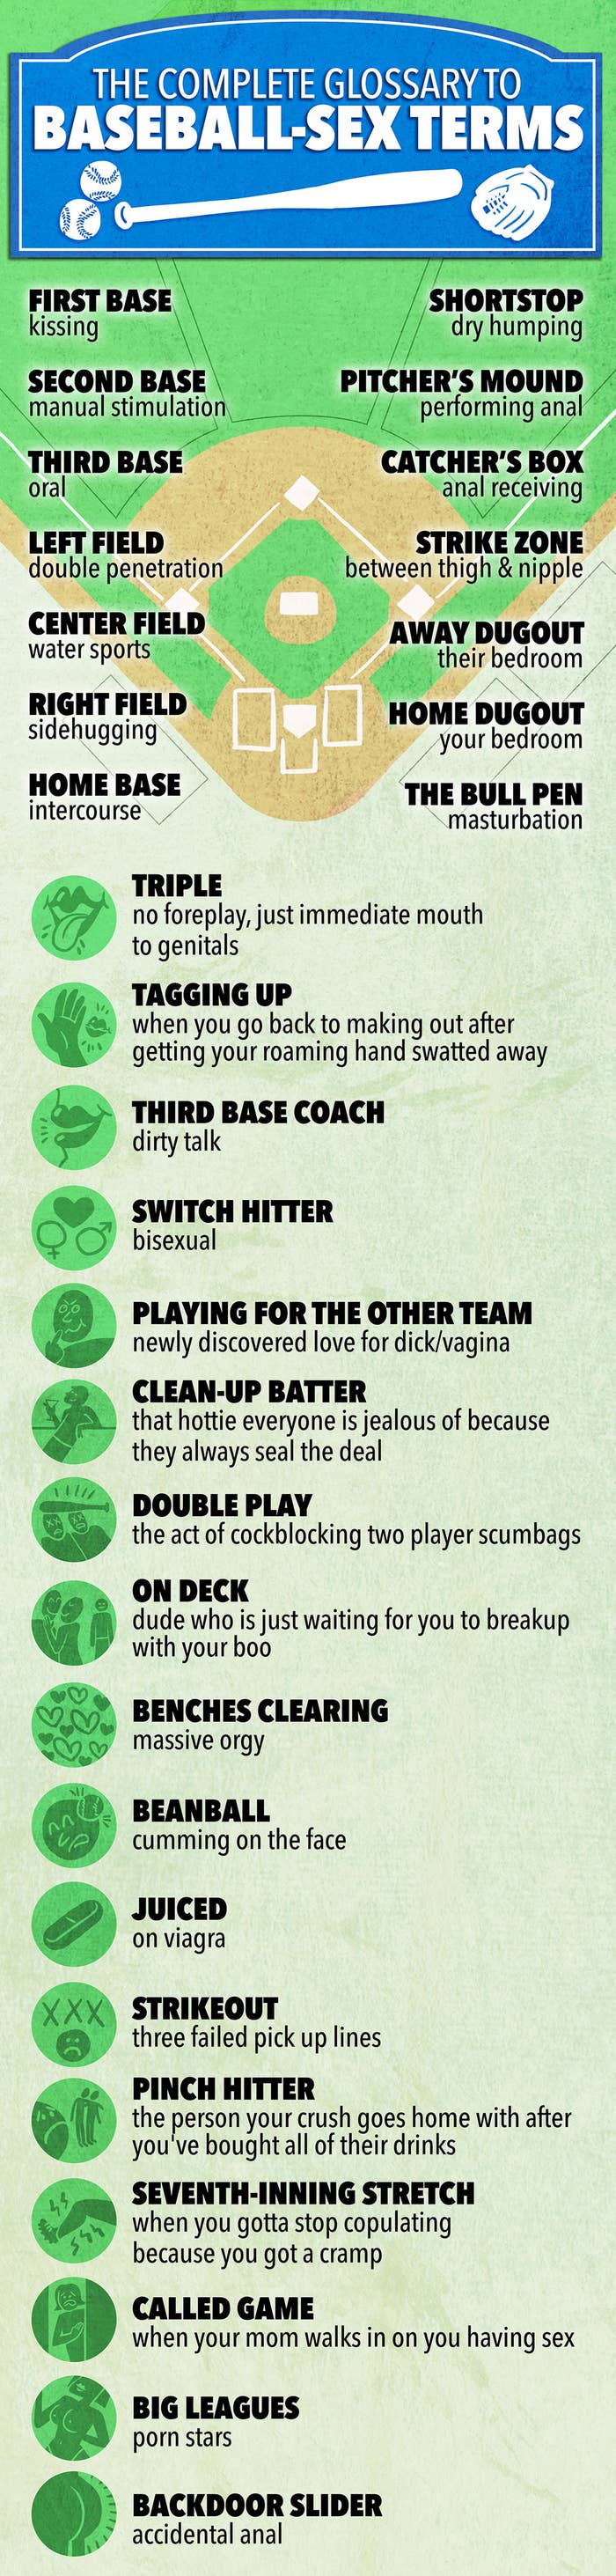 Everything You Need To Know About The Baseball Bases Sex Metaphor